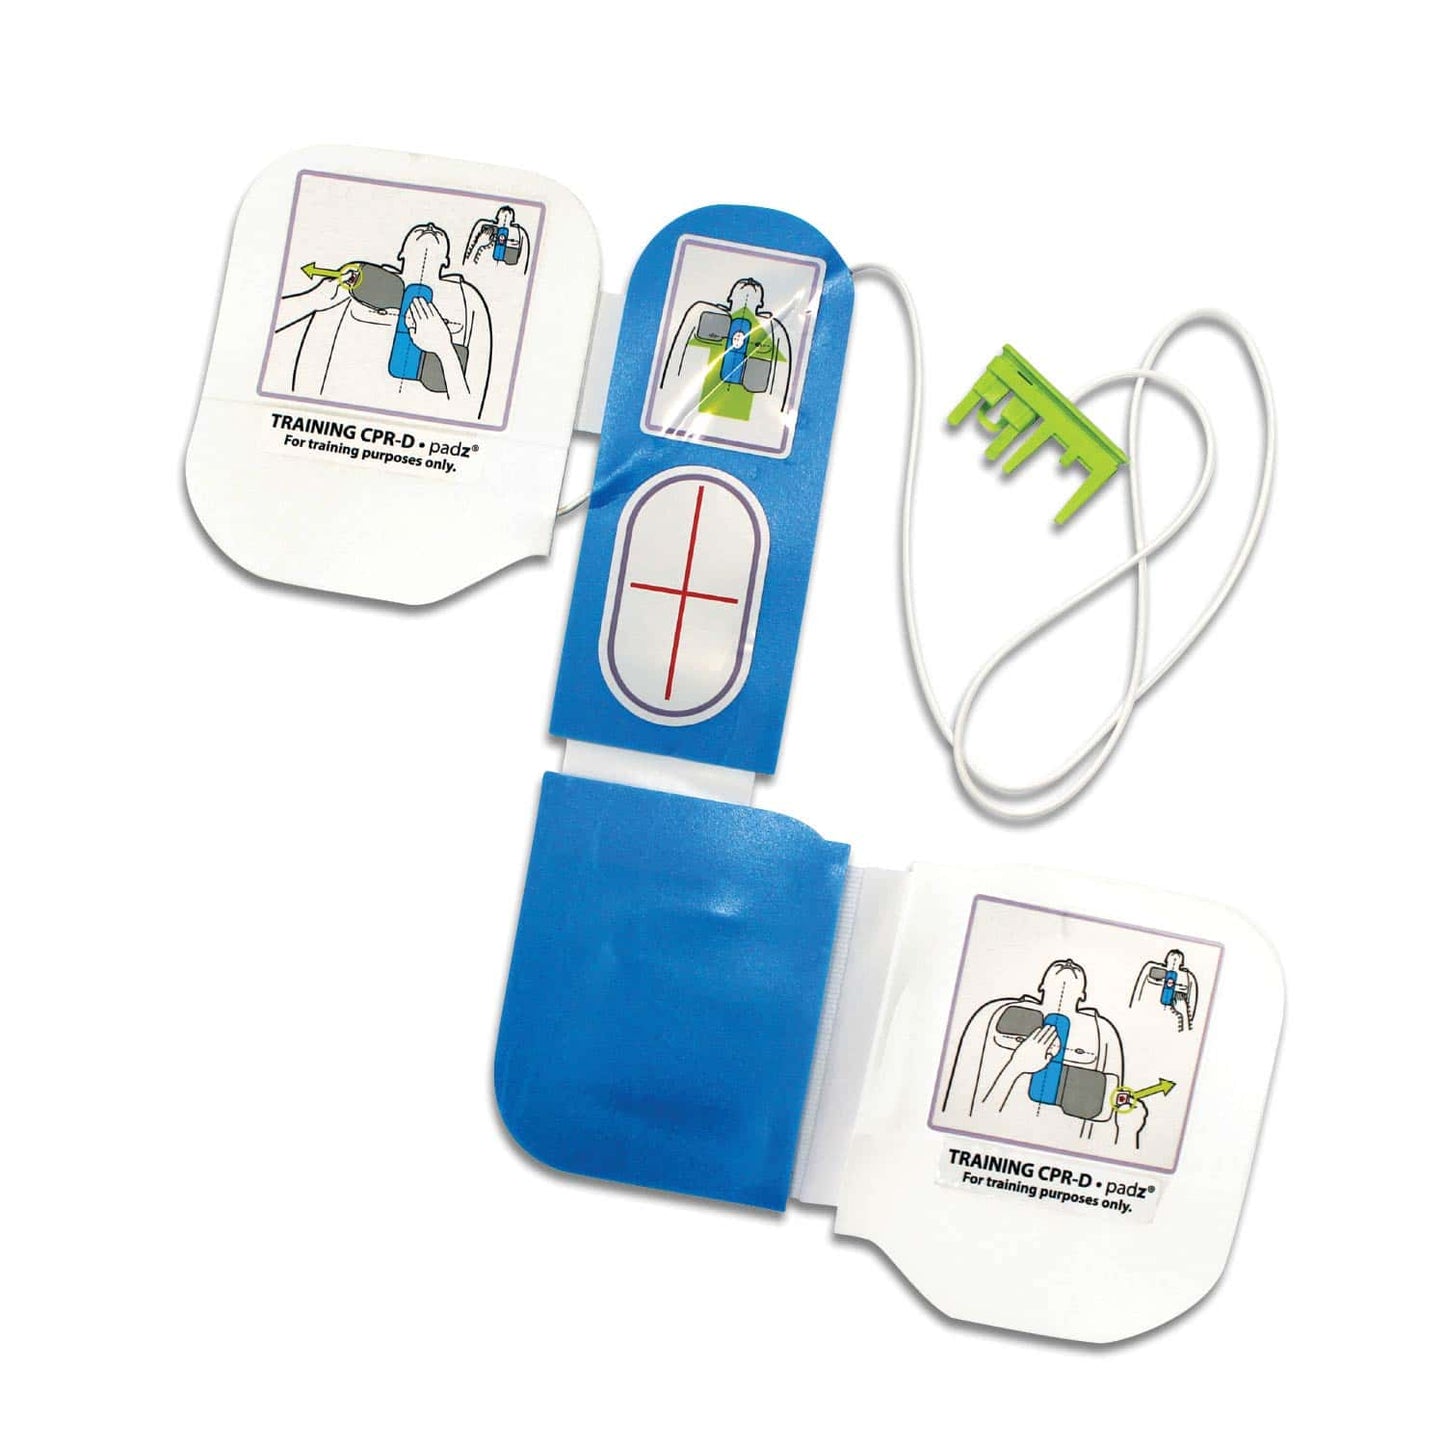 Cpr-D Padz® Training Electrodes For The Aed Plus Trainer Ii